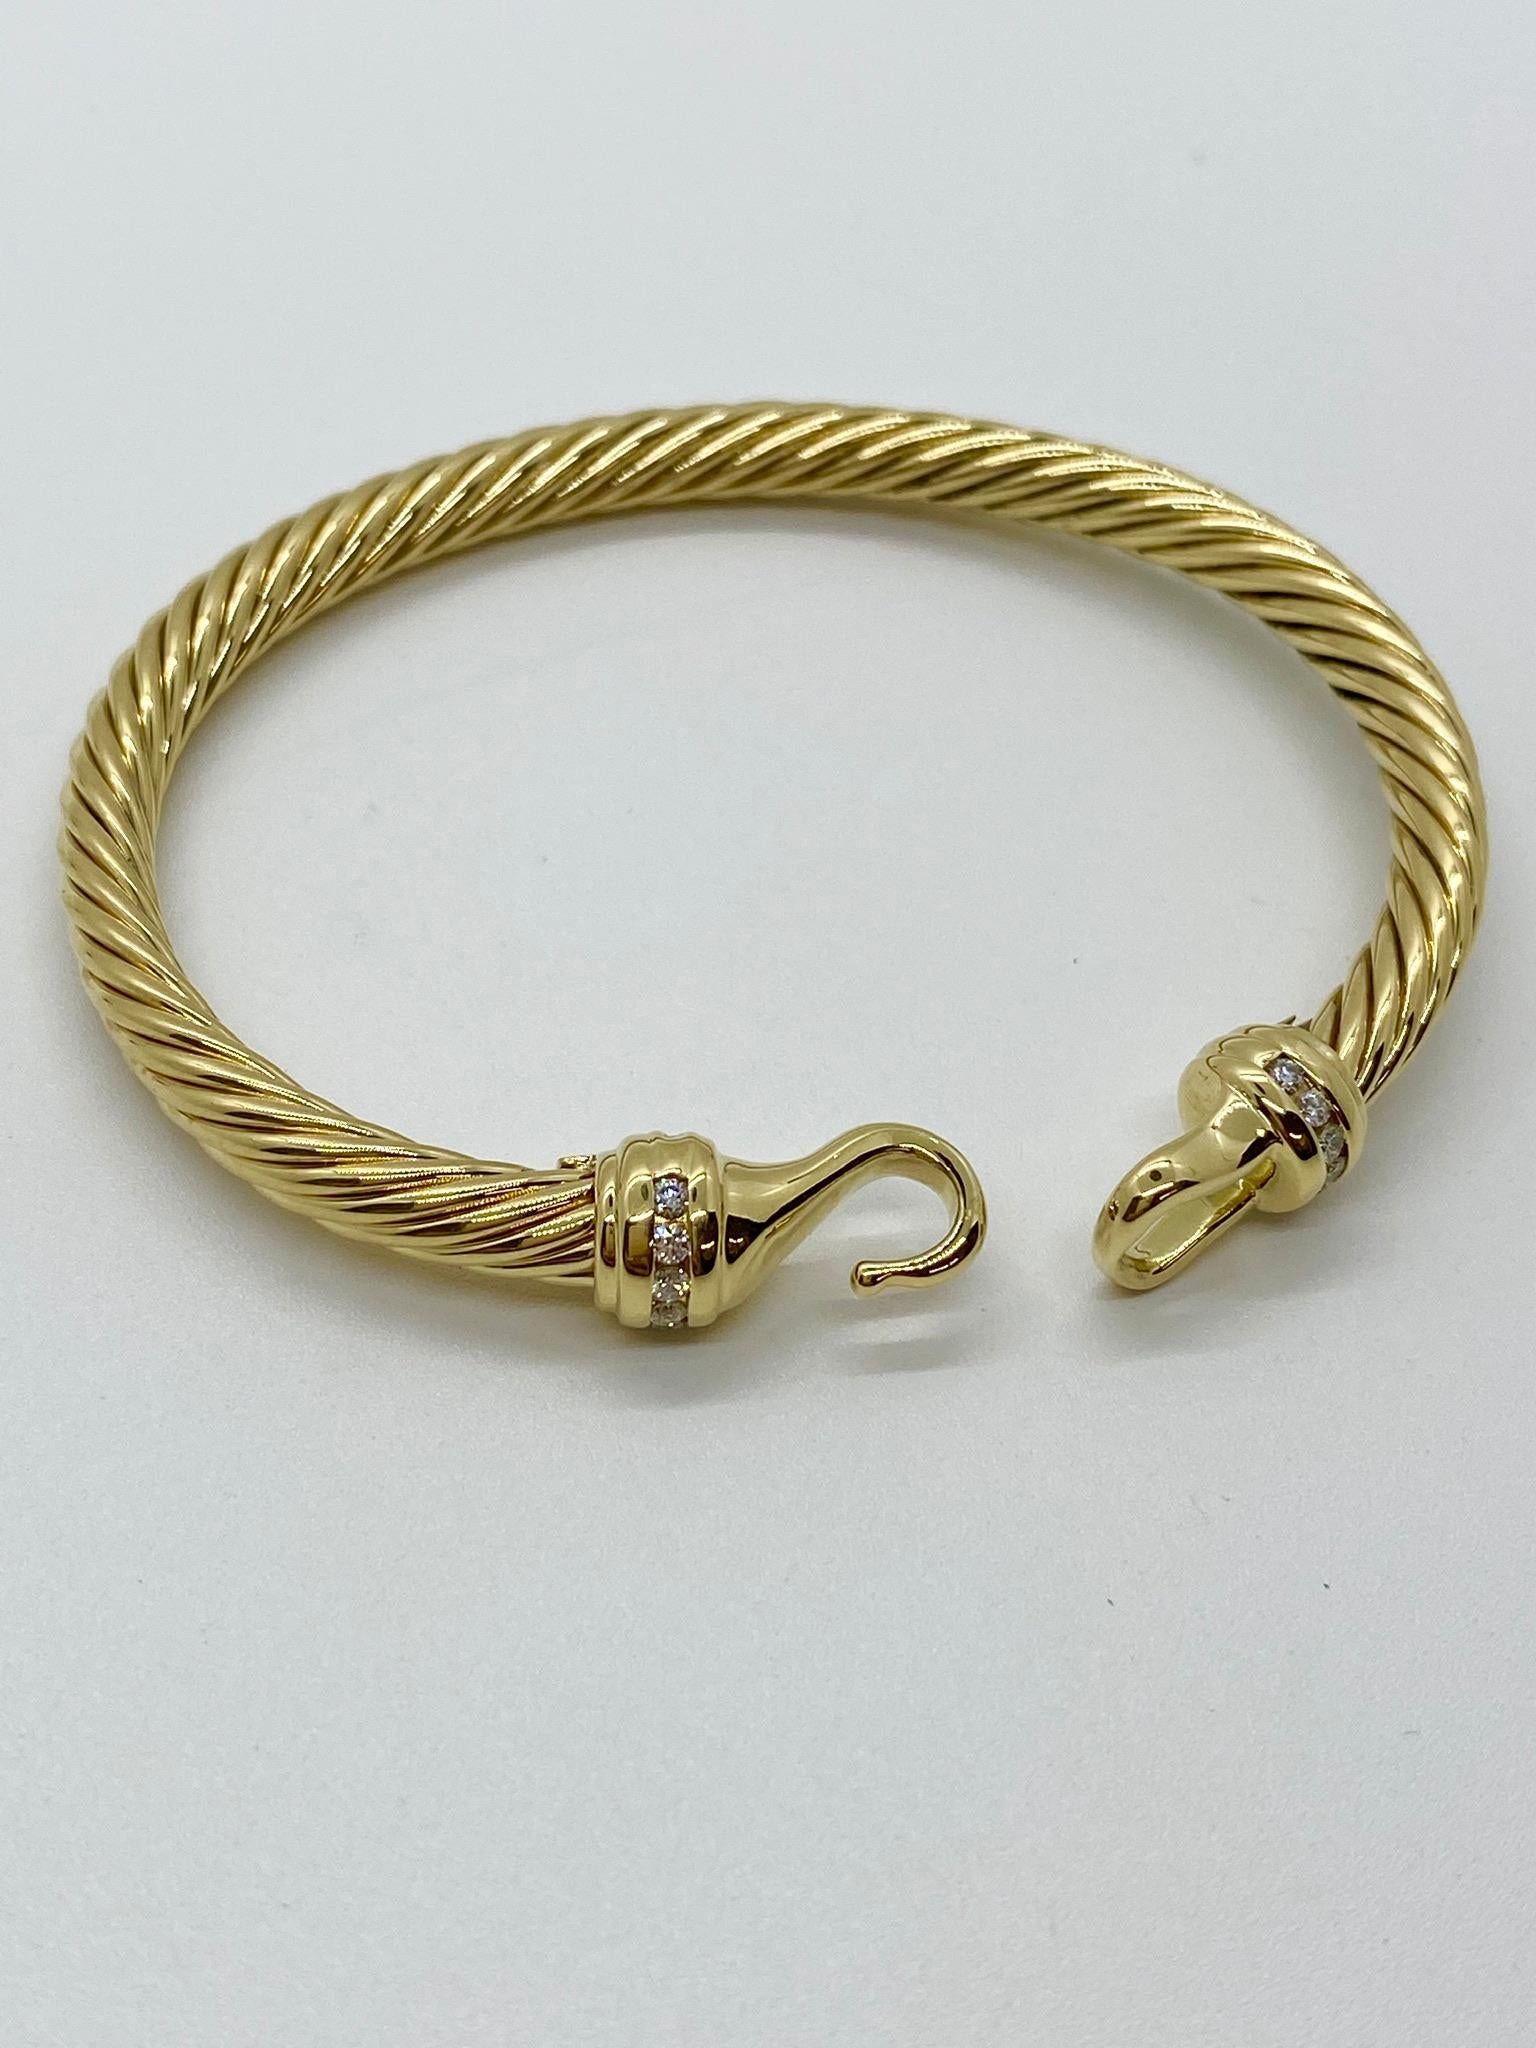 Vintage David Yurman 18k yellow gold and diamond classic cable bangle bracelet.  Diamonds are round brilliant cut and are approximately 0.12 carat total  weight G-H color and SI1-SI2 clarity.   Bracelet measures 6.5 inches for wrist size with hook